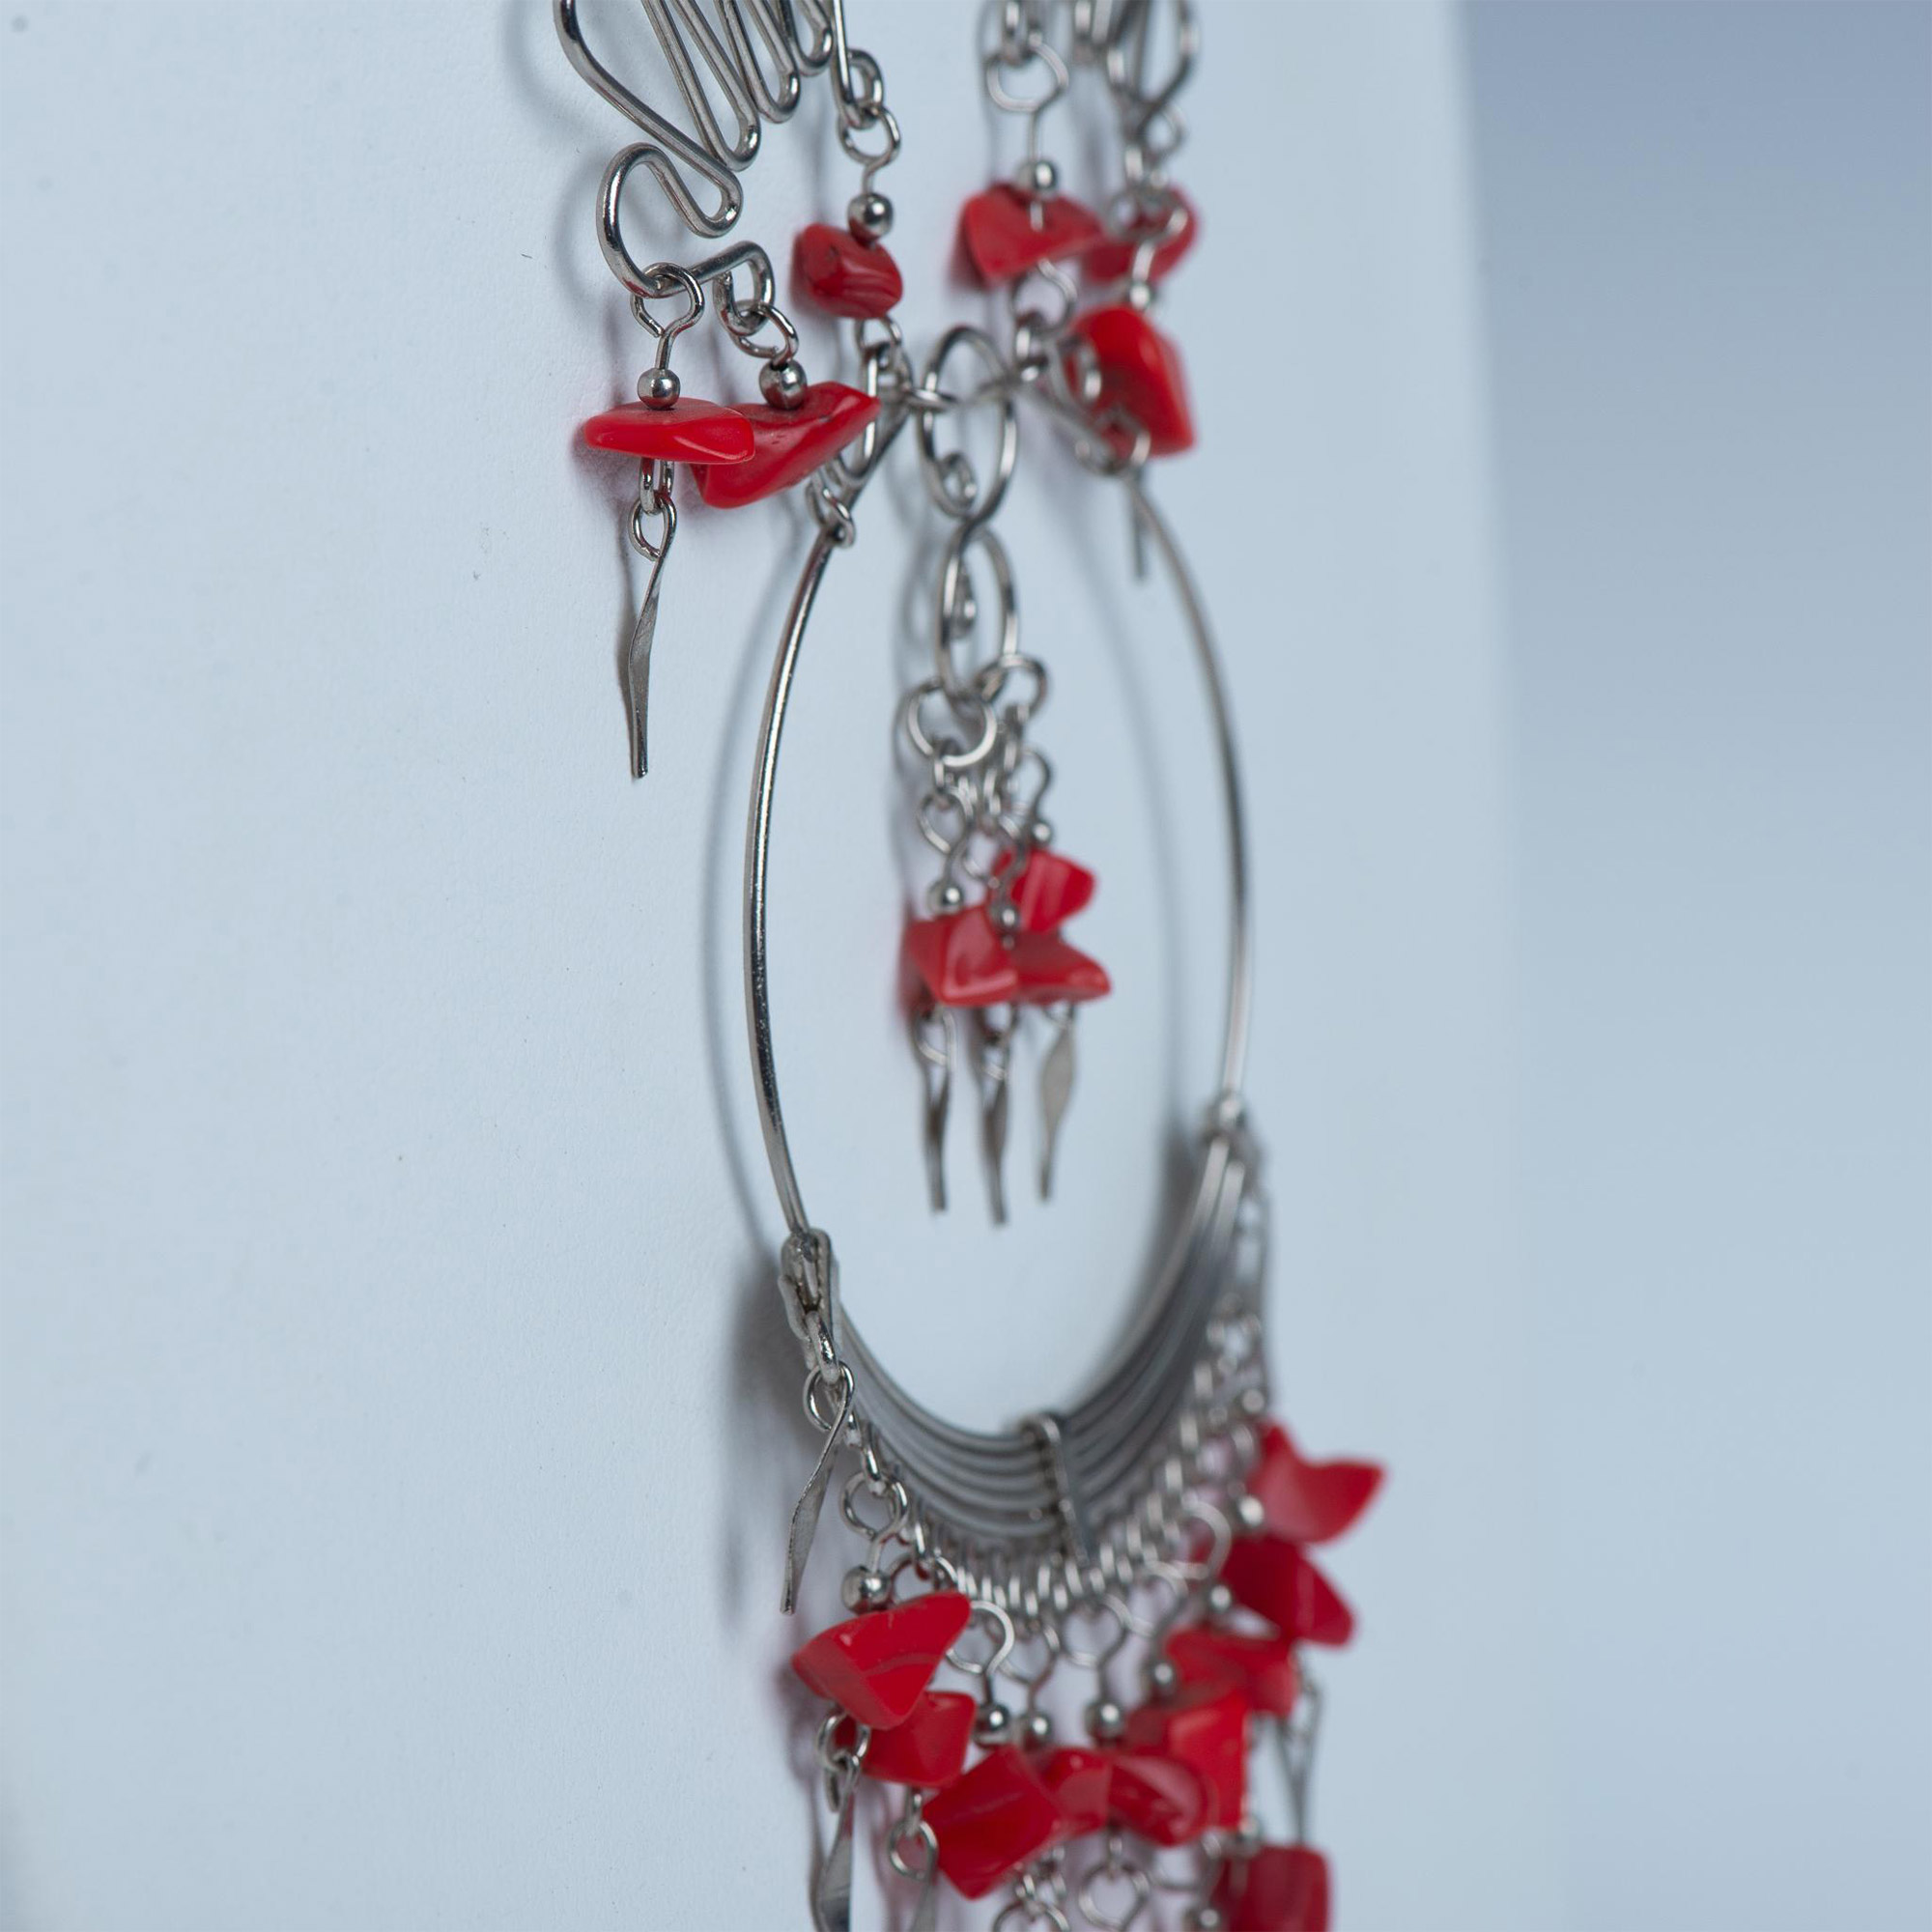 Bohemian Silver Metal Wire & Coral Bead Necklace - Image 3 of 4